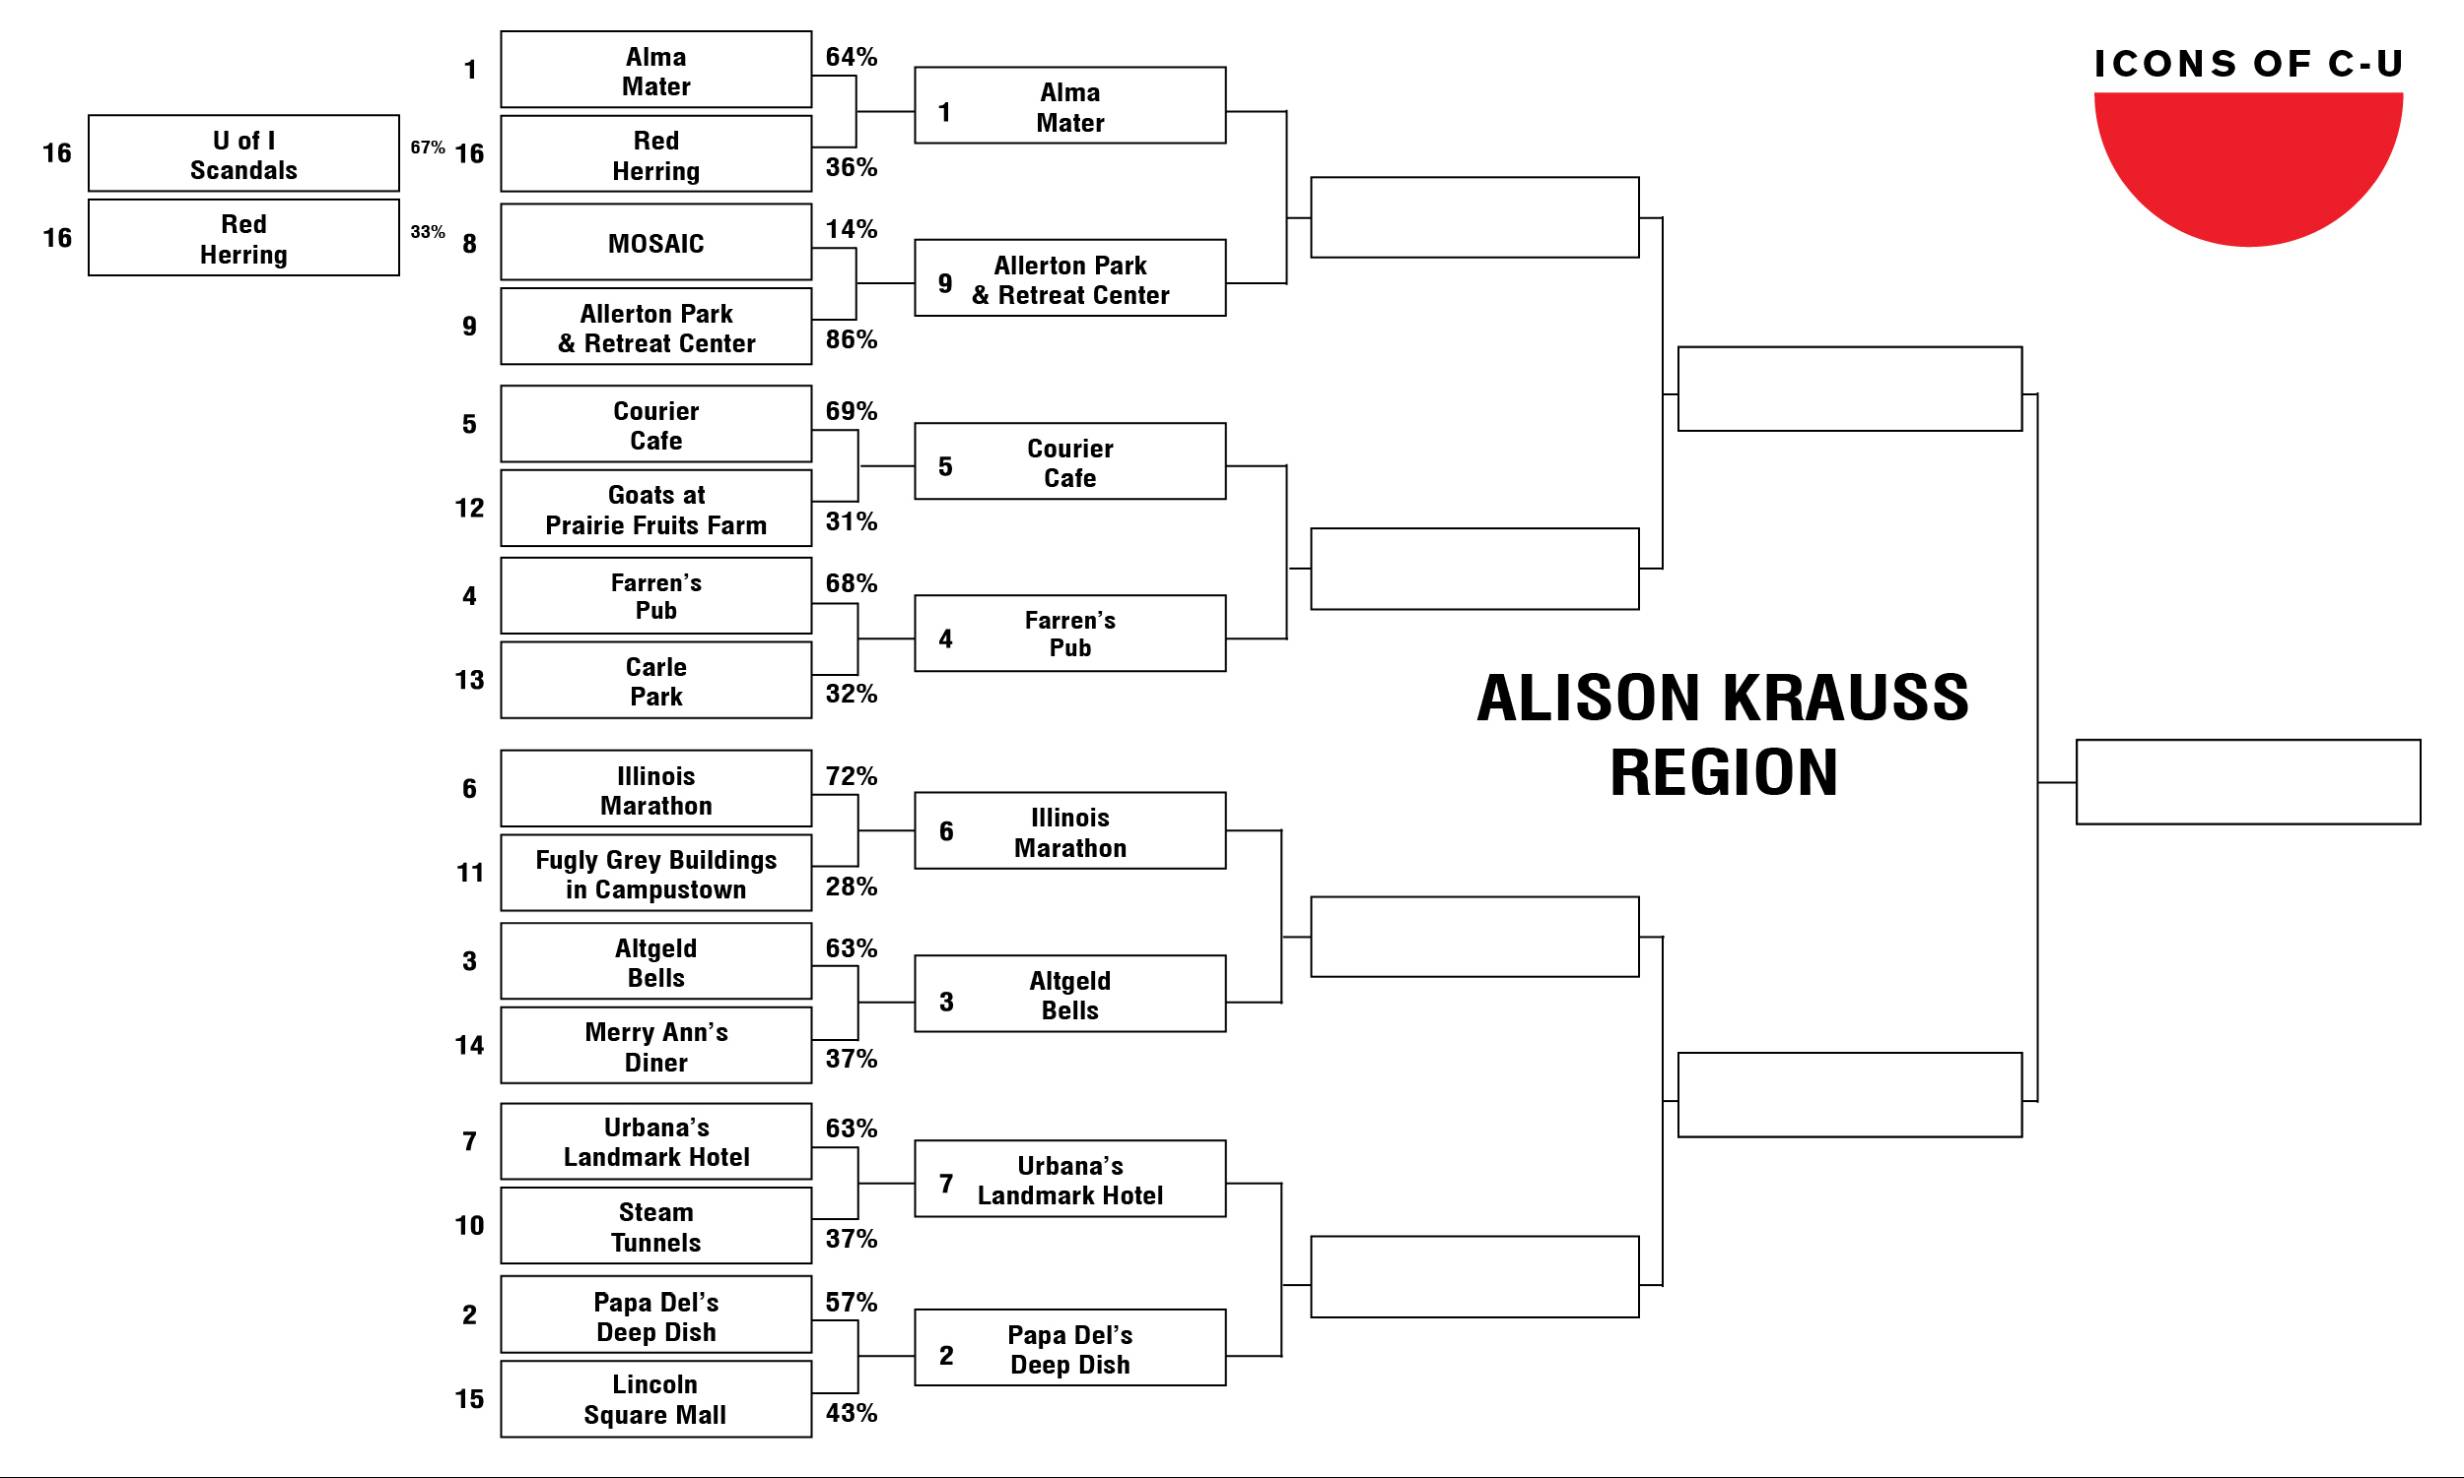 IMAGE: One 18 team NCAA style region bracket, white background with black lines and black text for names and seeds.